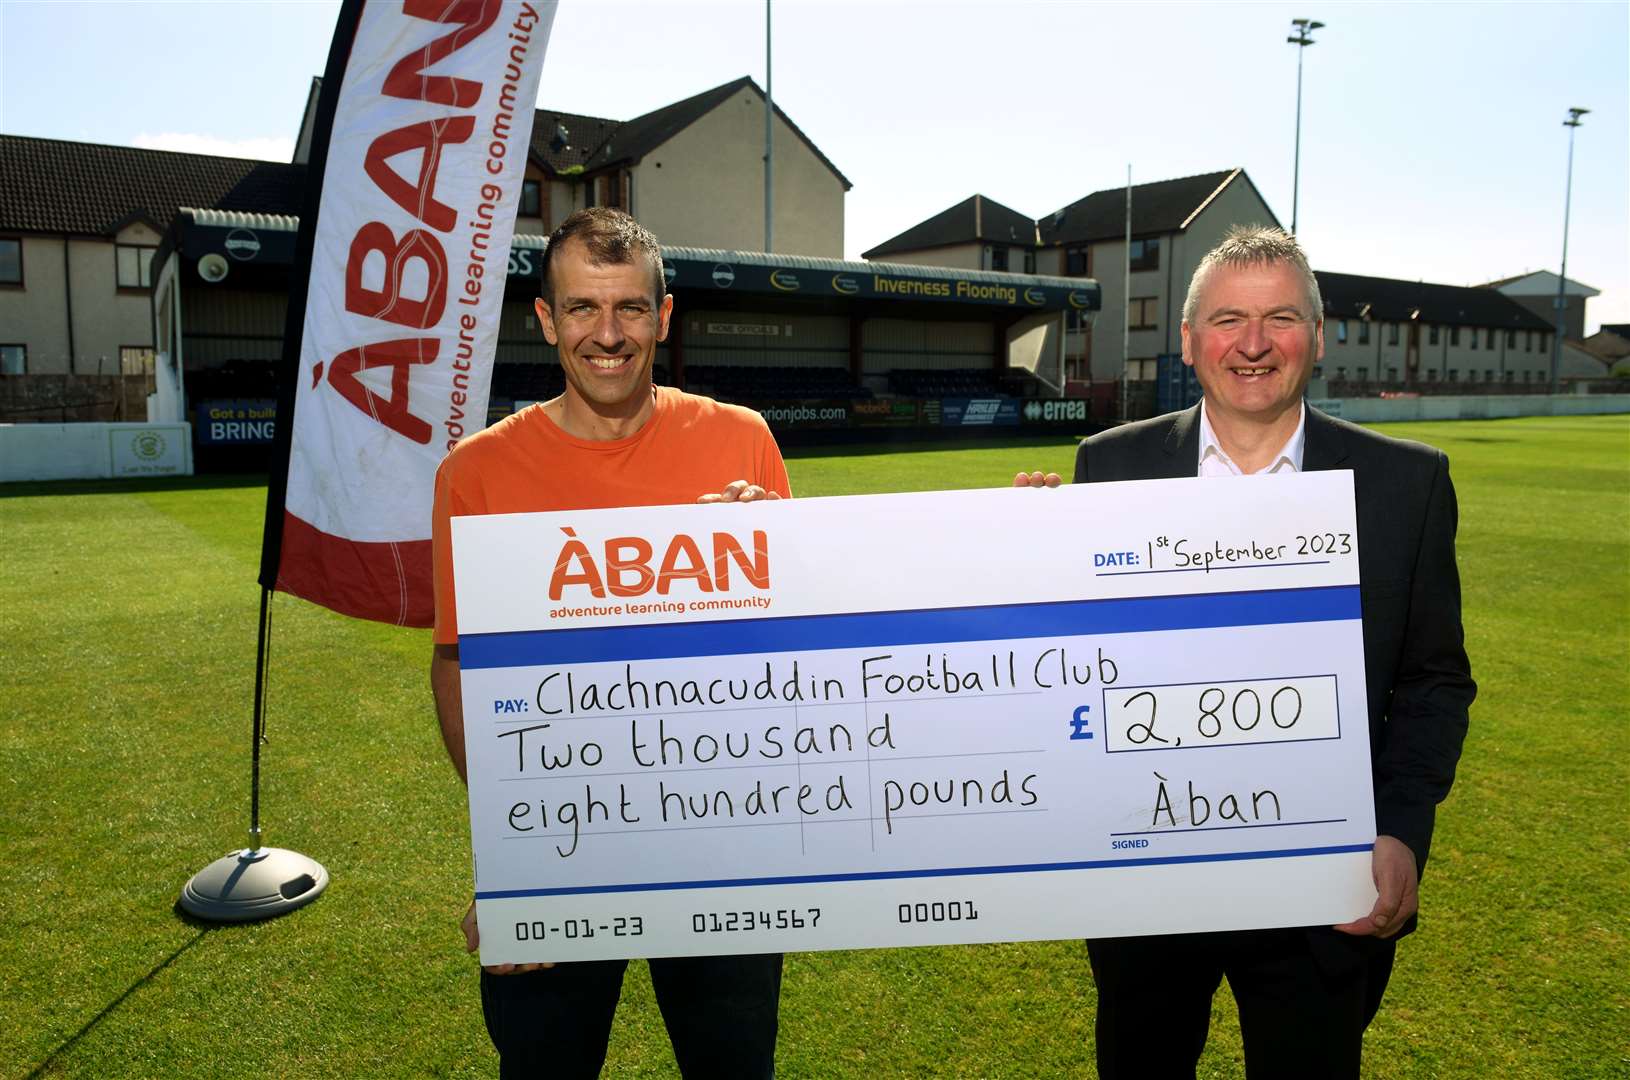 Johannes Petersen, Chief Executive of Aban presents a cheque to Alex Chisholm, Clachnacuddin Director/Club Secretary. Picture: James Mackenzie.